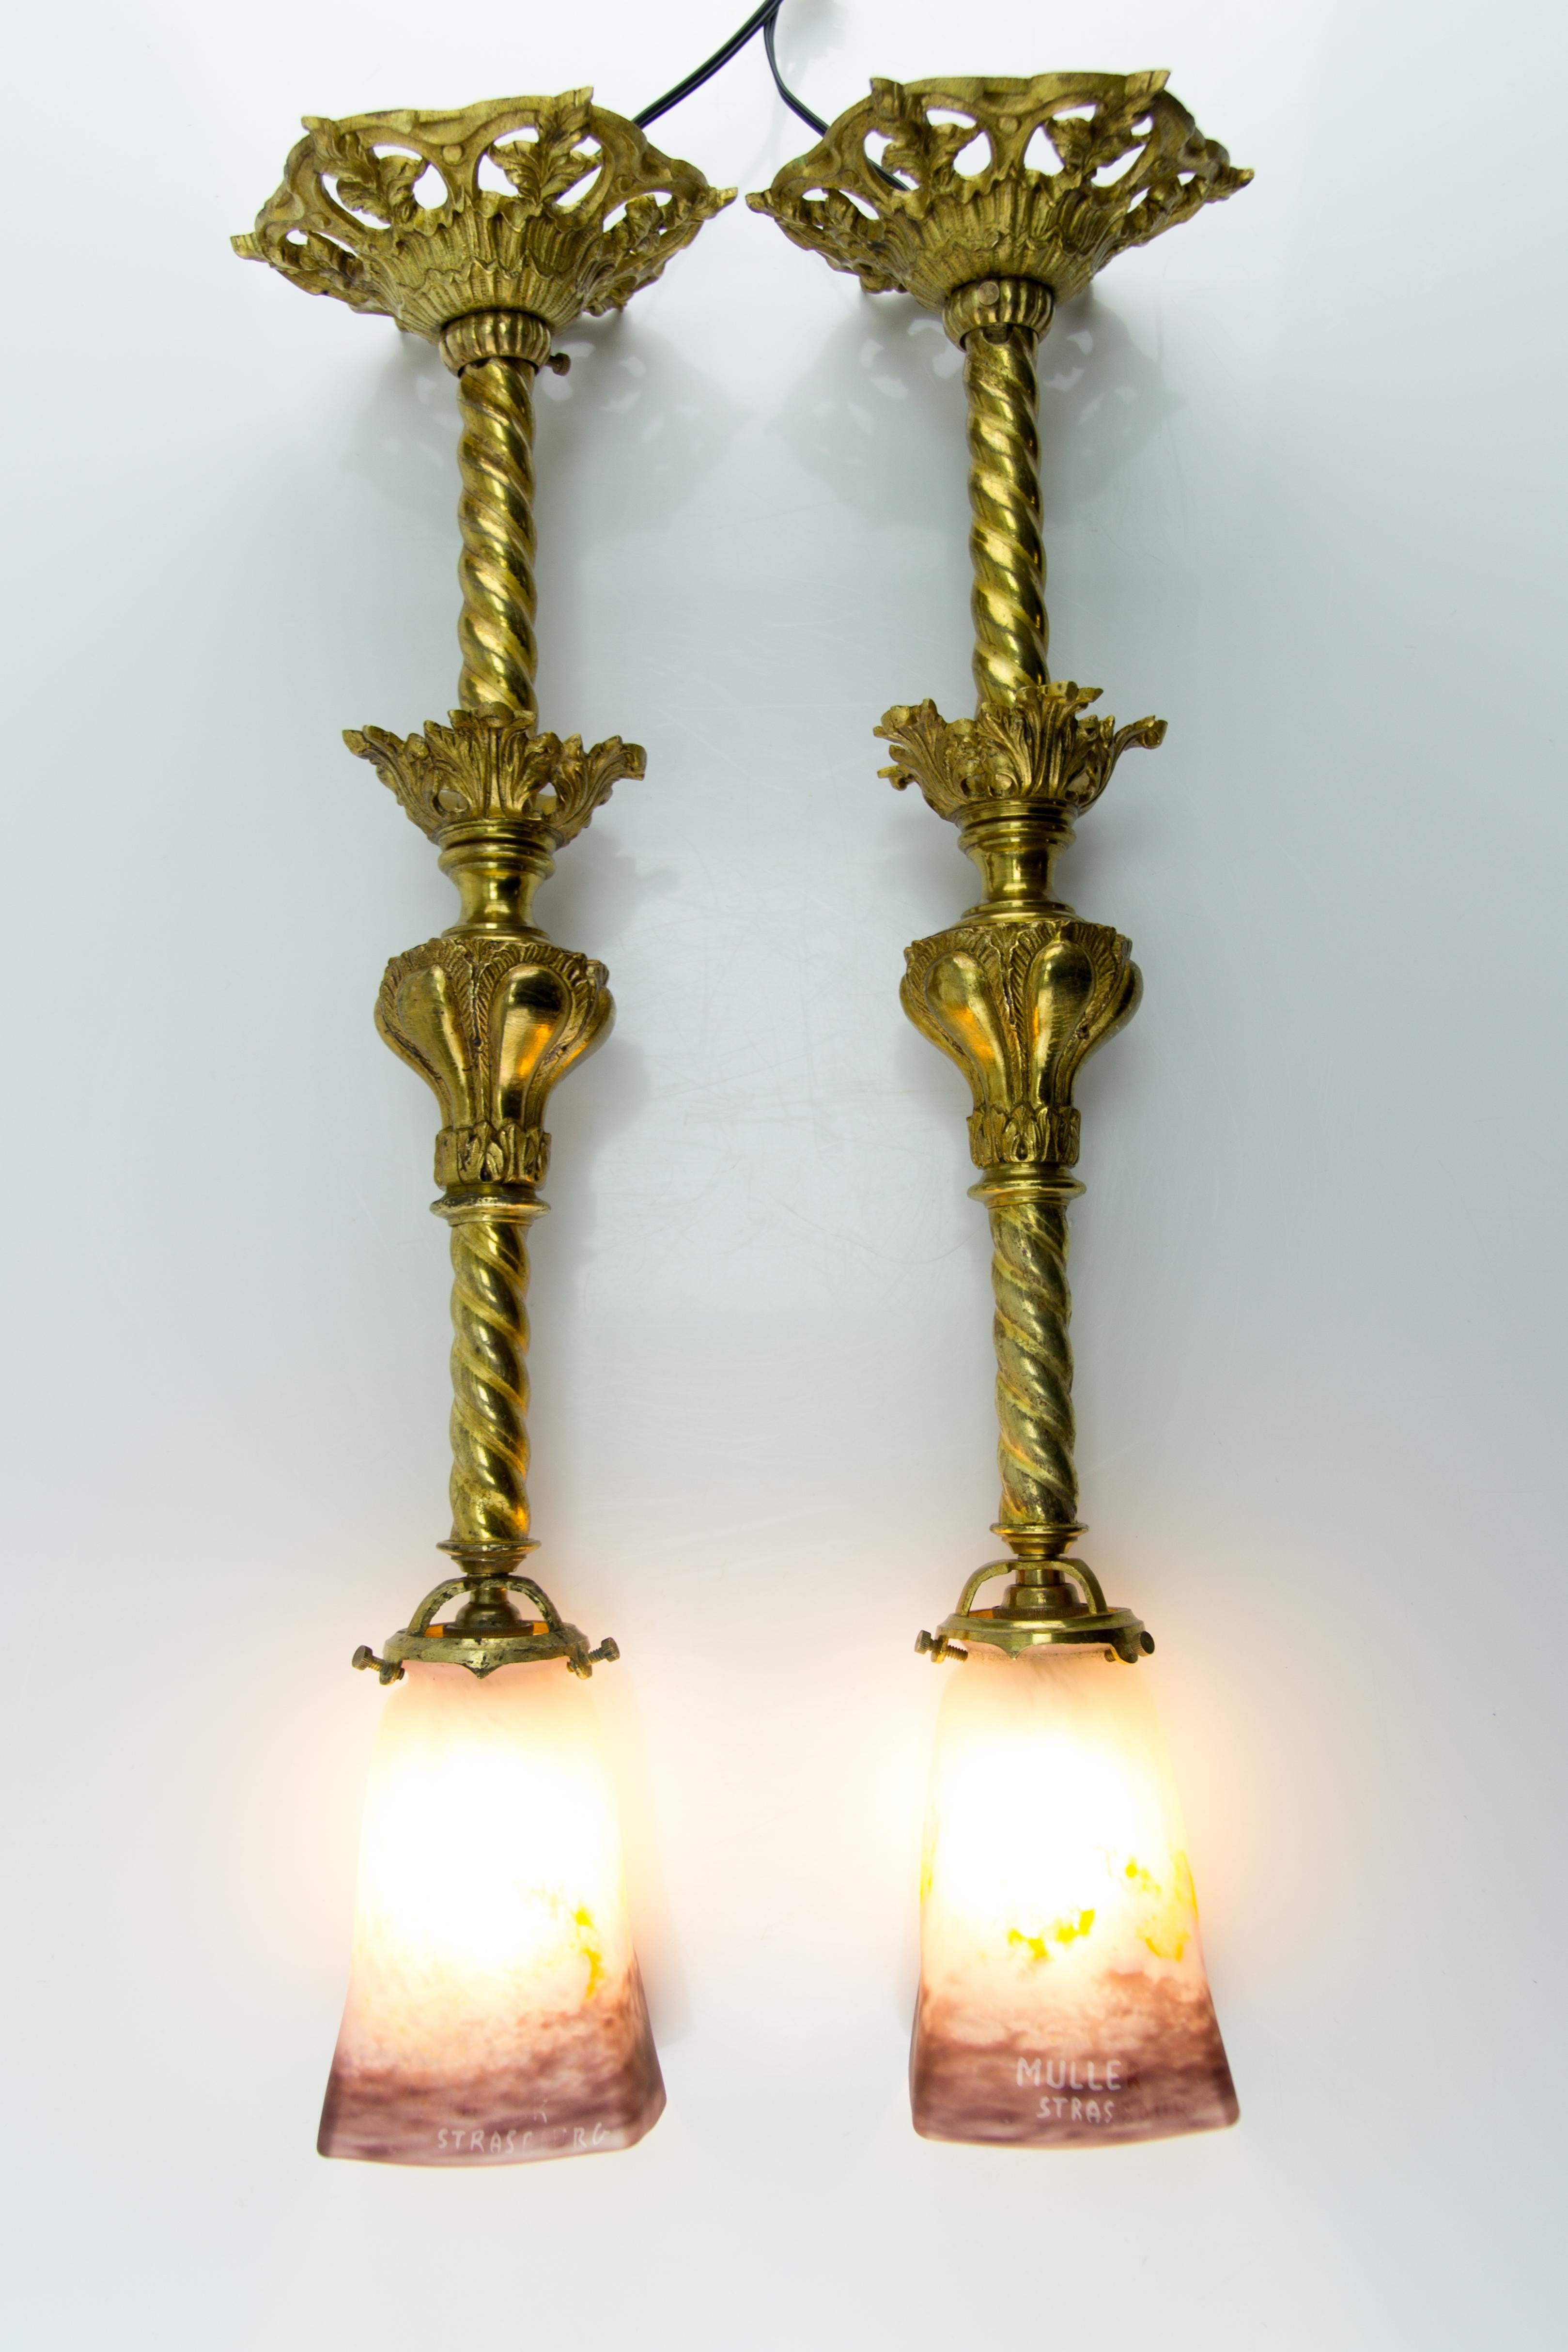 French Muller-Strasbourg Glass and Gilt Bronze Pendant Light Fixtures, a Pair For Sale 6